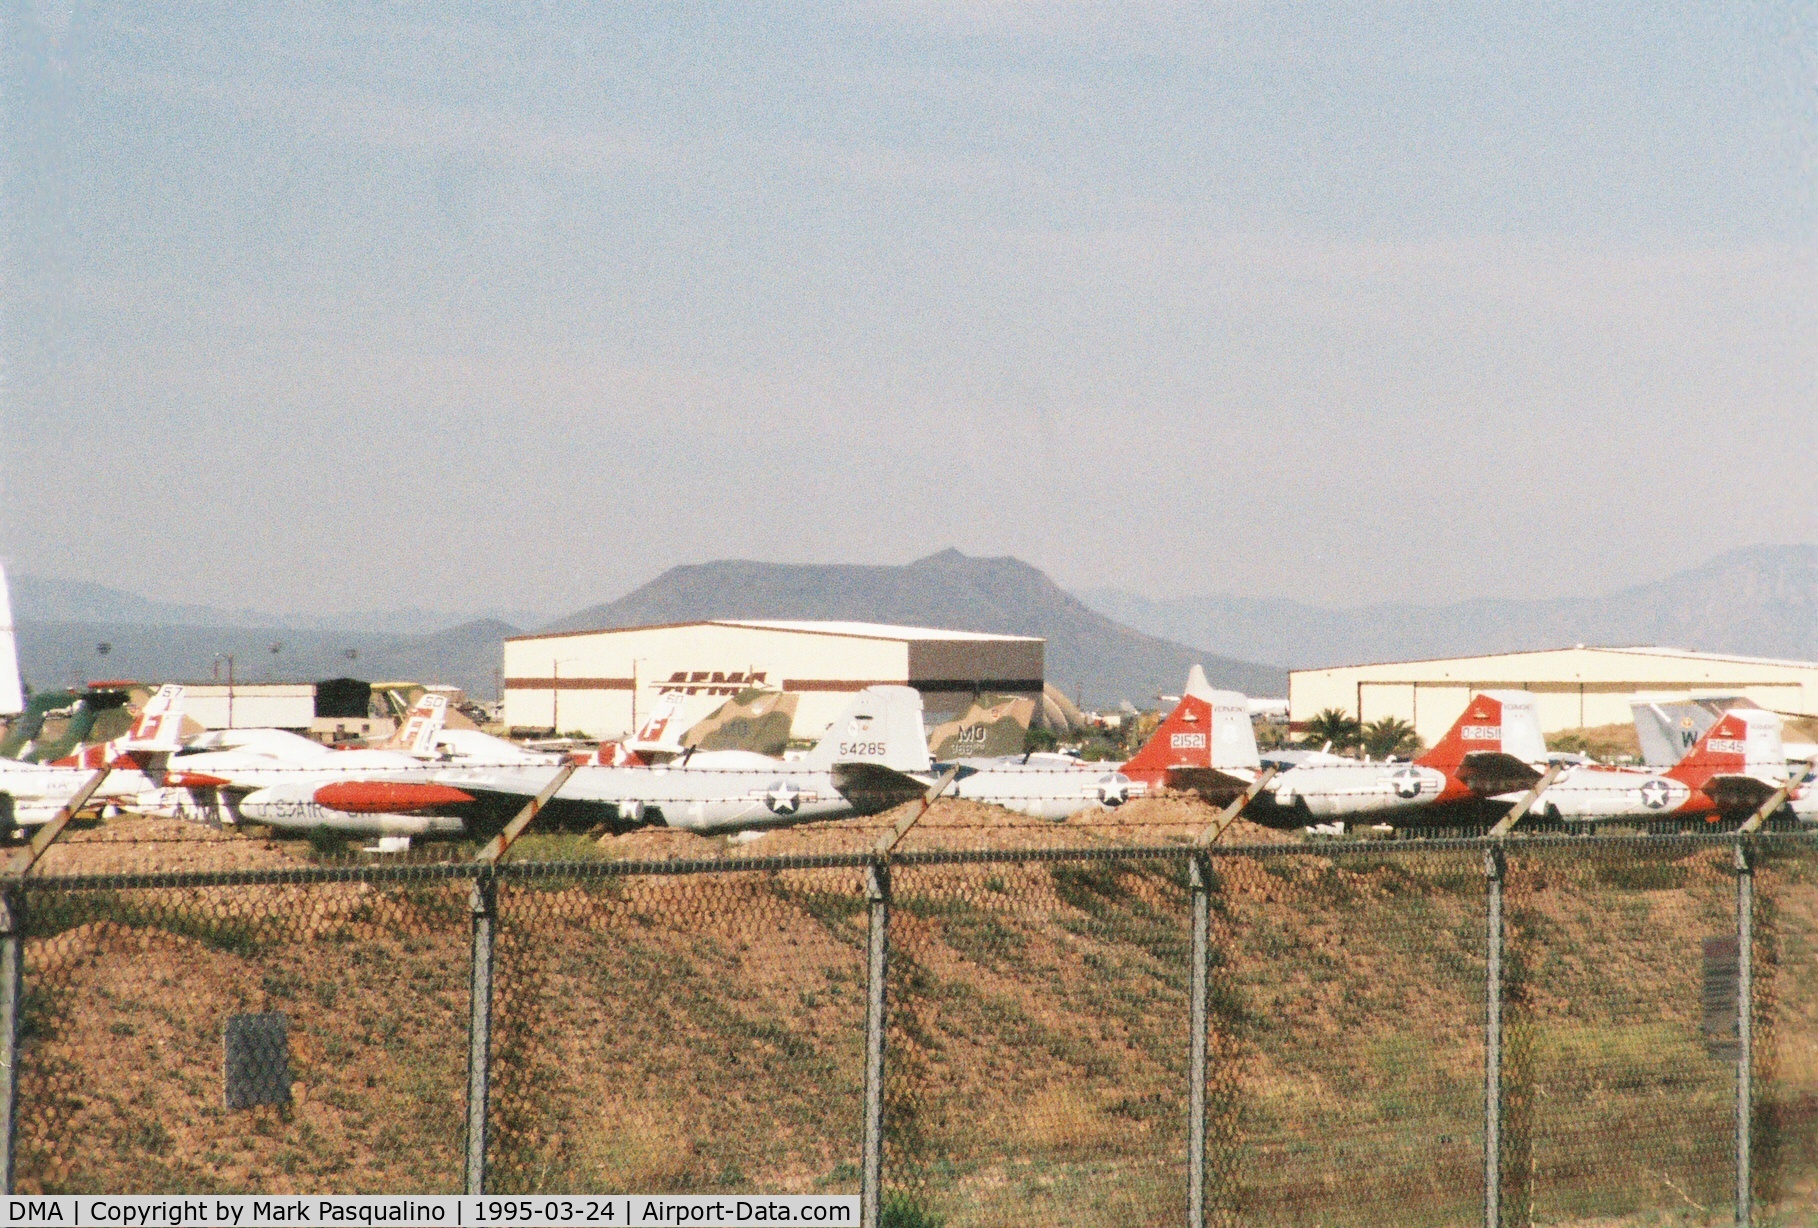 Davis Monthan Afb Airport (DMA) - B-57 aircraft in storage